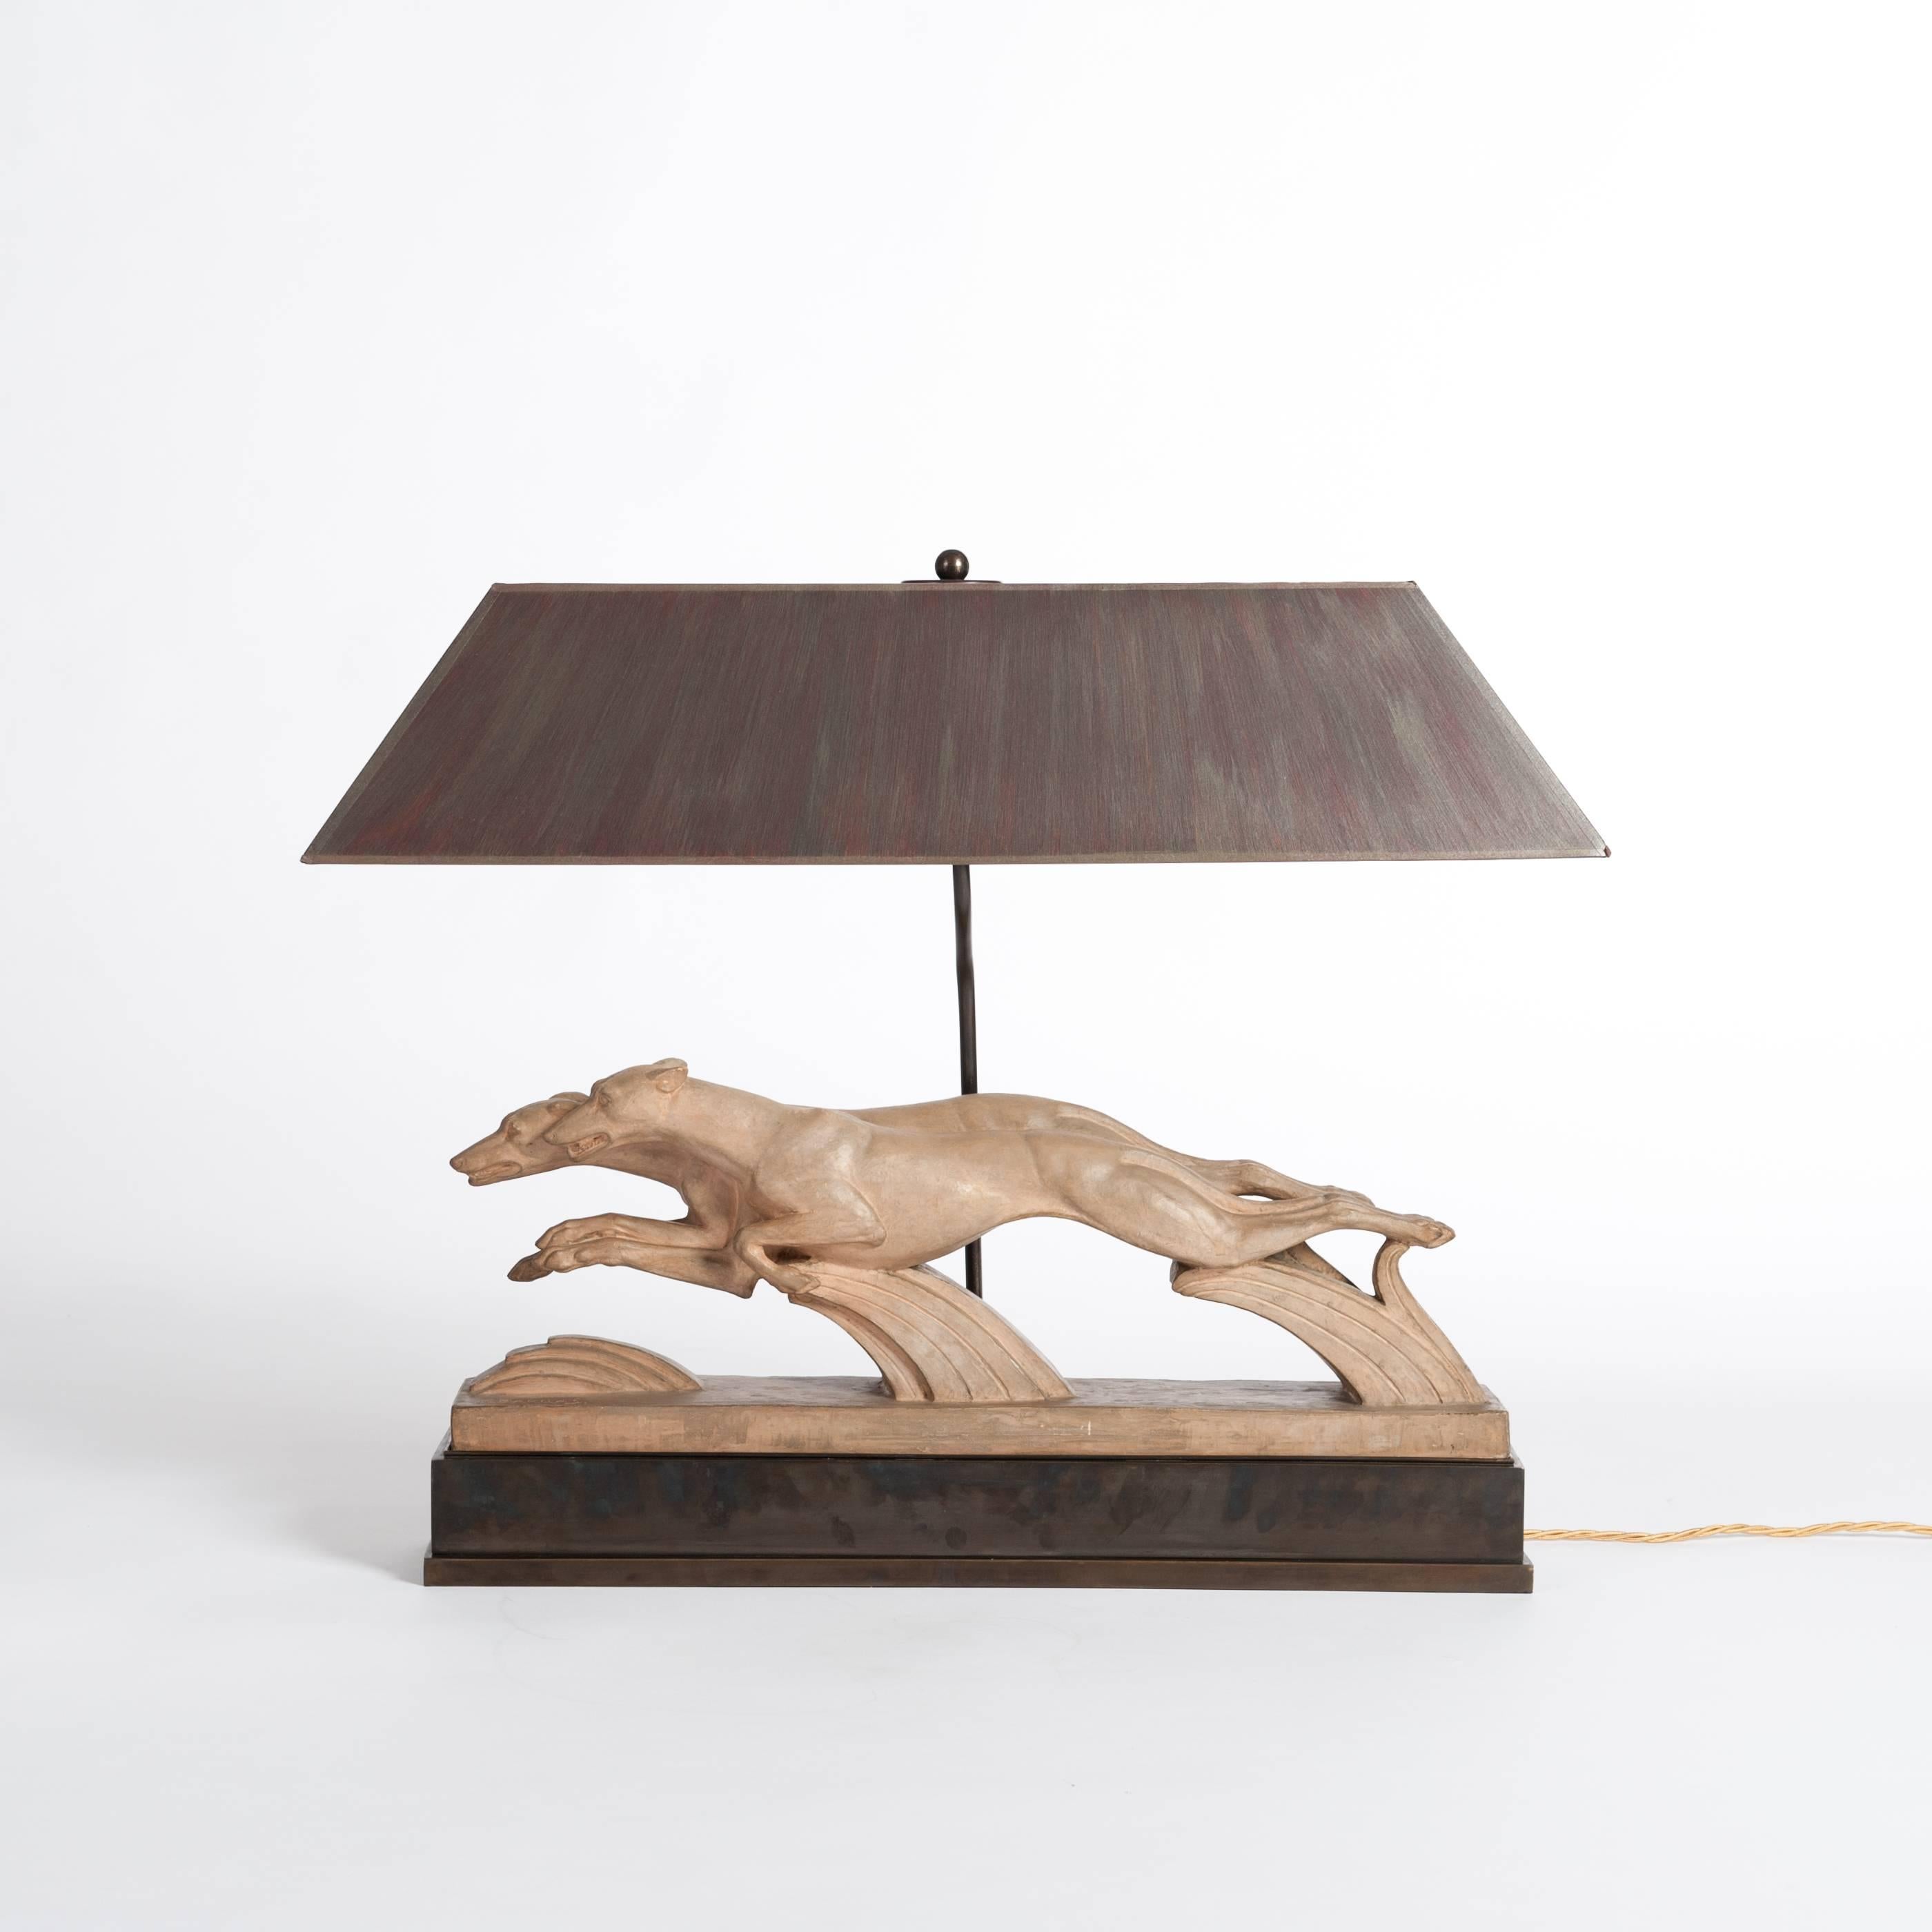 Very fine Art Deco cast terracotta sculpture from France with a purpose built lamp construction and socle in bronze.
Sujet: Patinated Art Deco greyhounds on the move, handsigned H. BARGAS
The rectangular lampshade is hand-painted in grey, red, brown